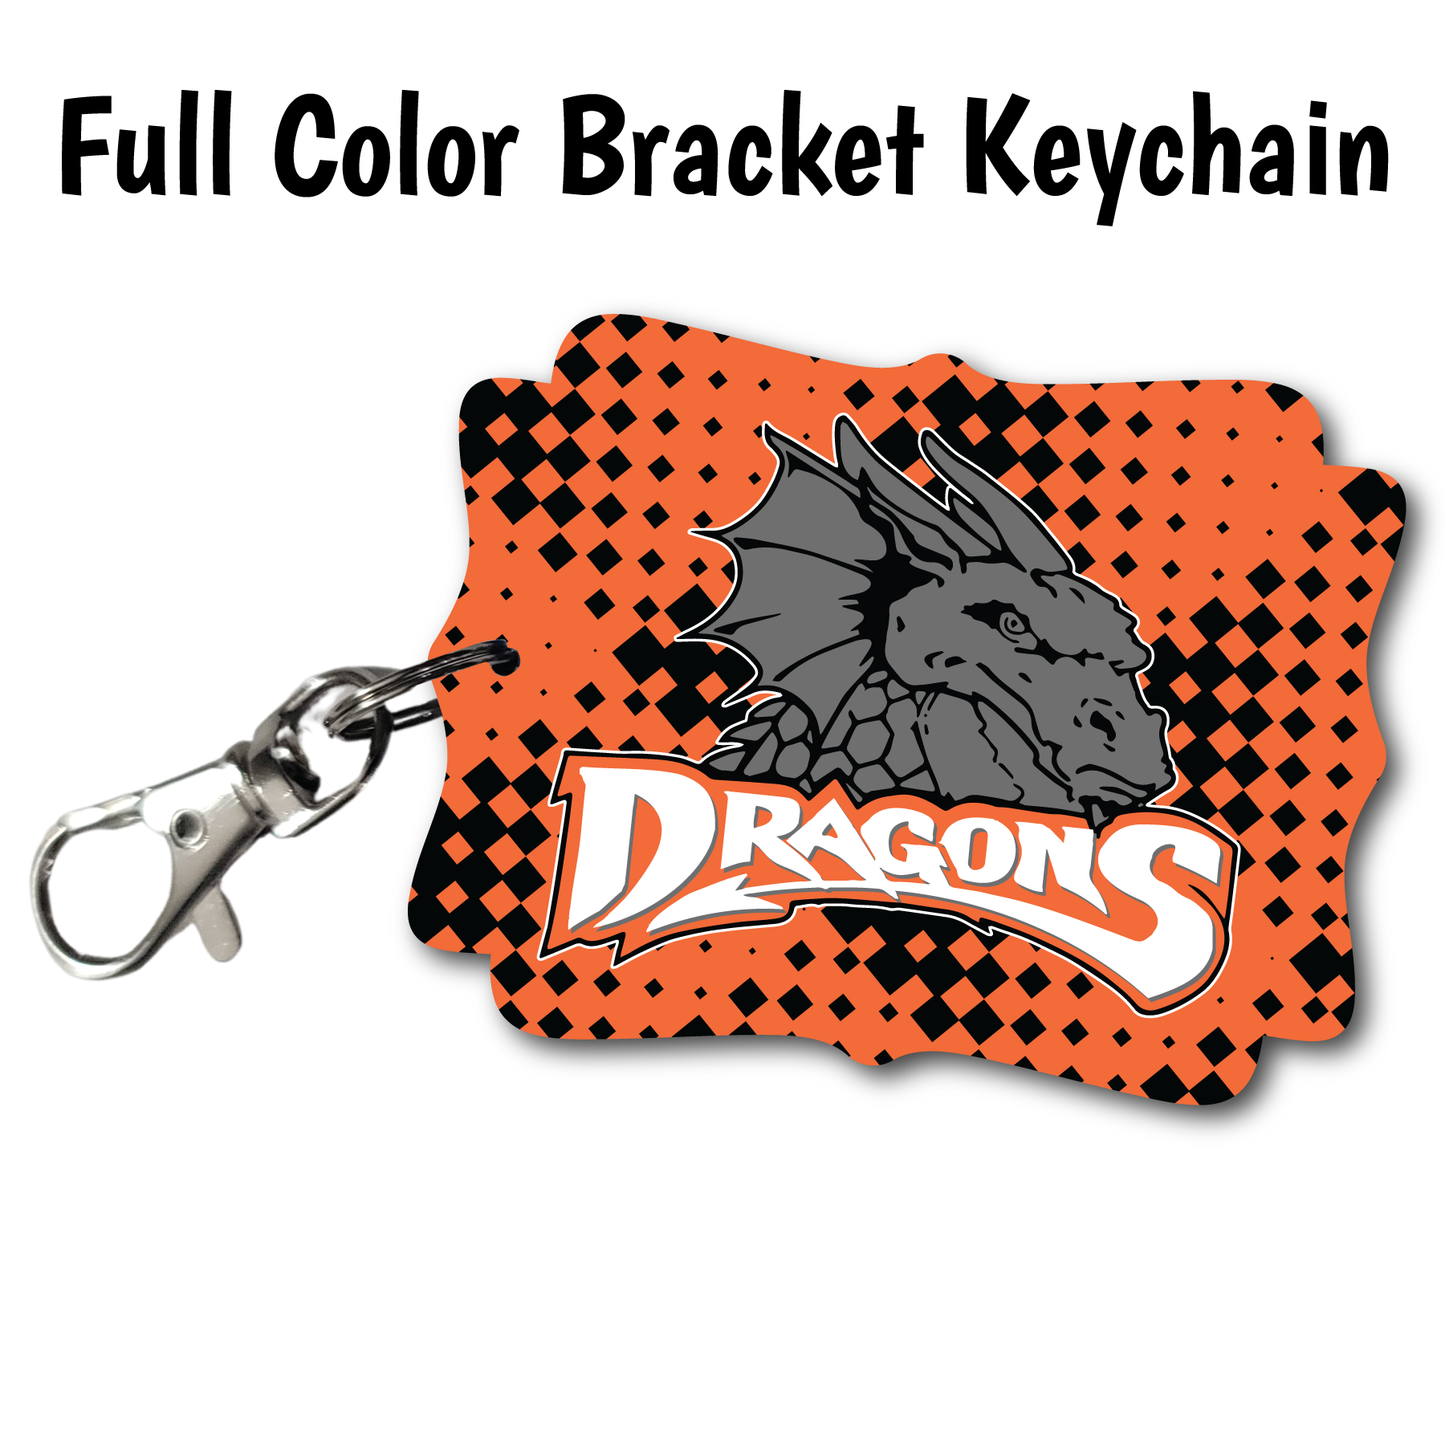 Malad Dragons - Full Color Keychains